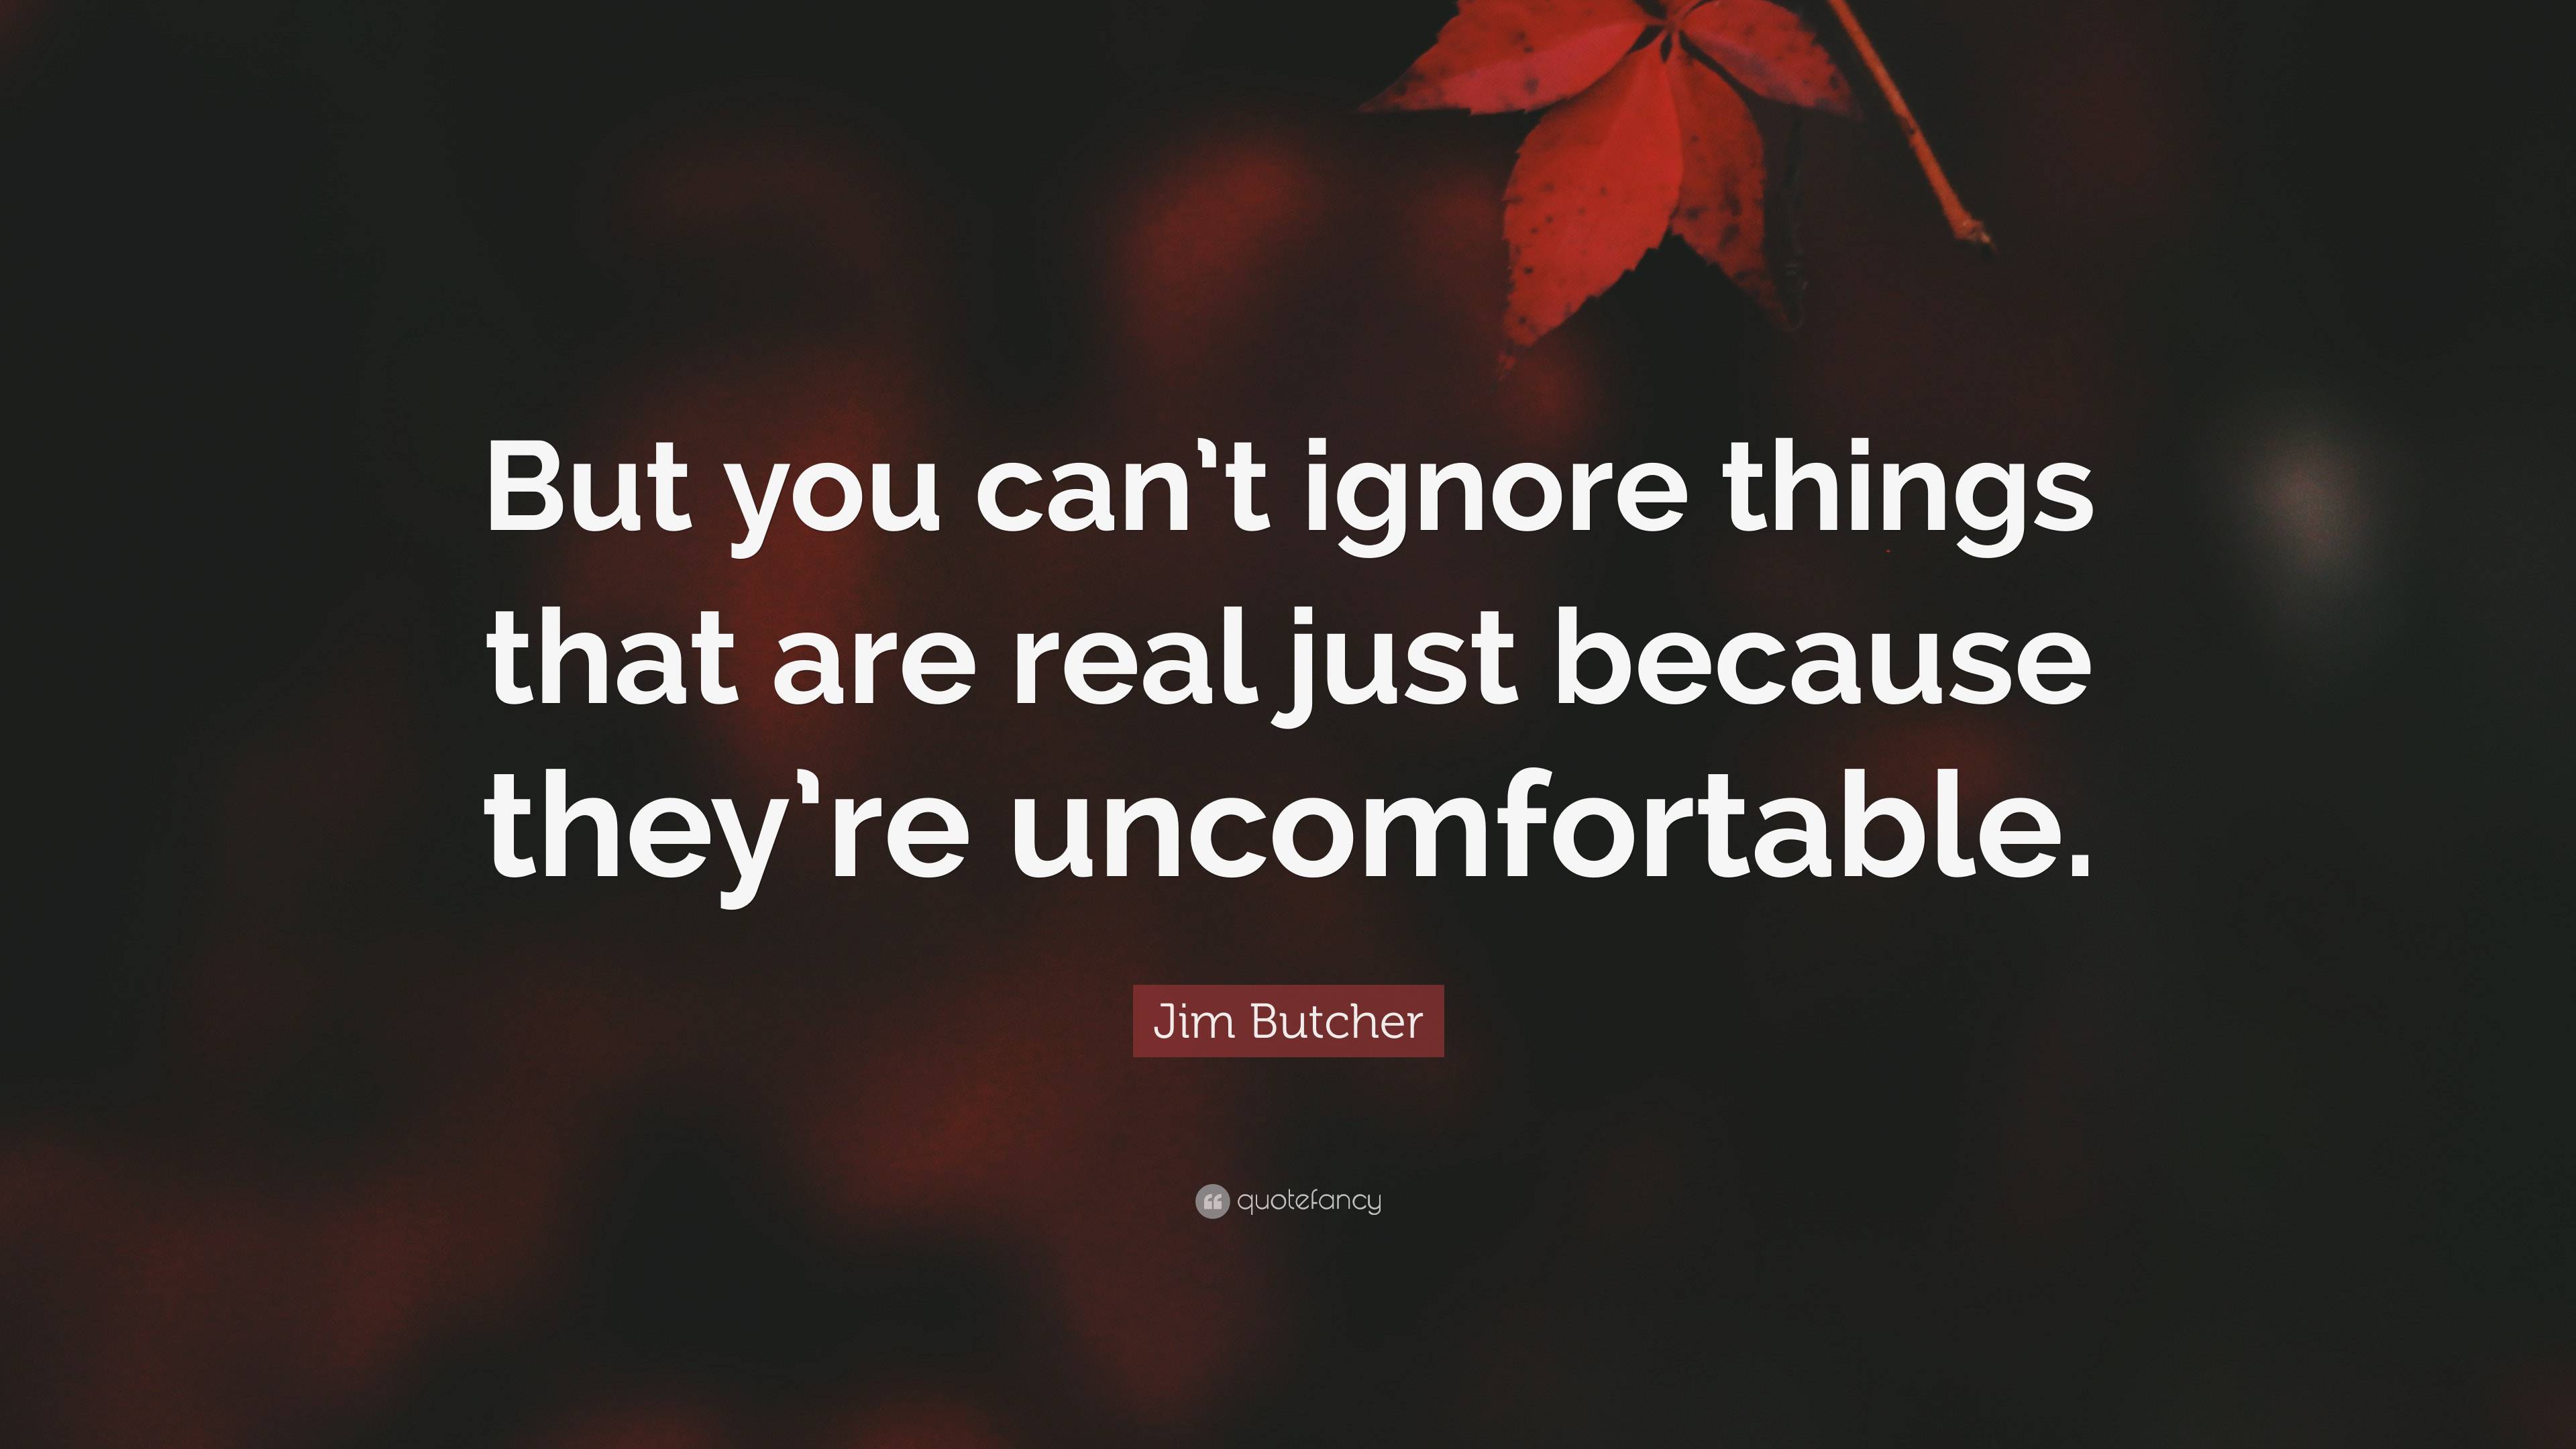 Jim Butcher Quote: “But you can’t ignore things that are real just ...